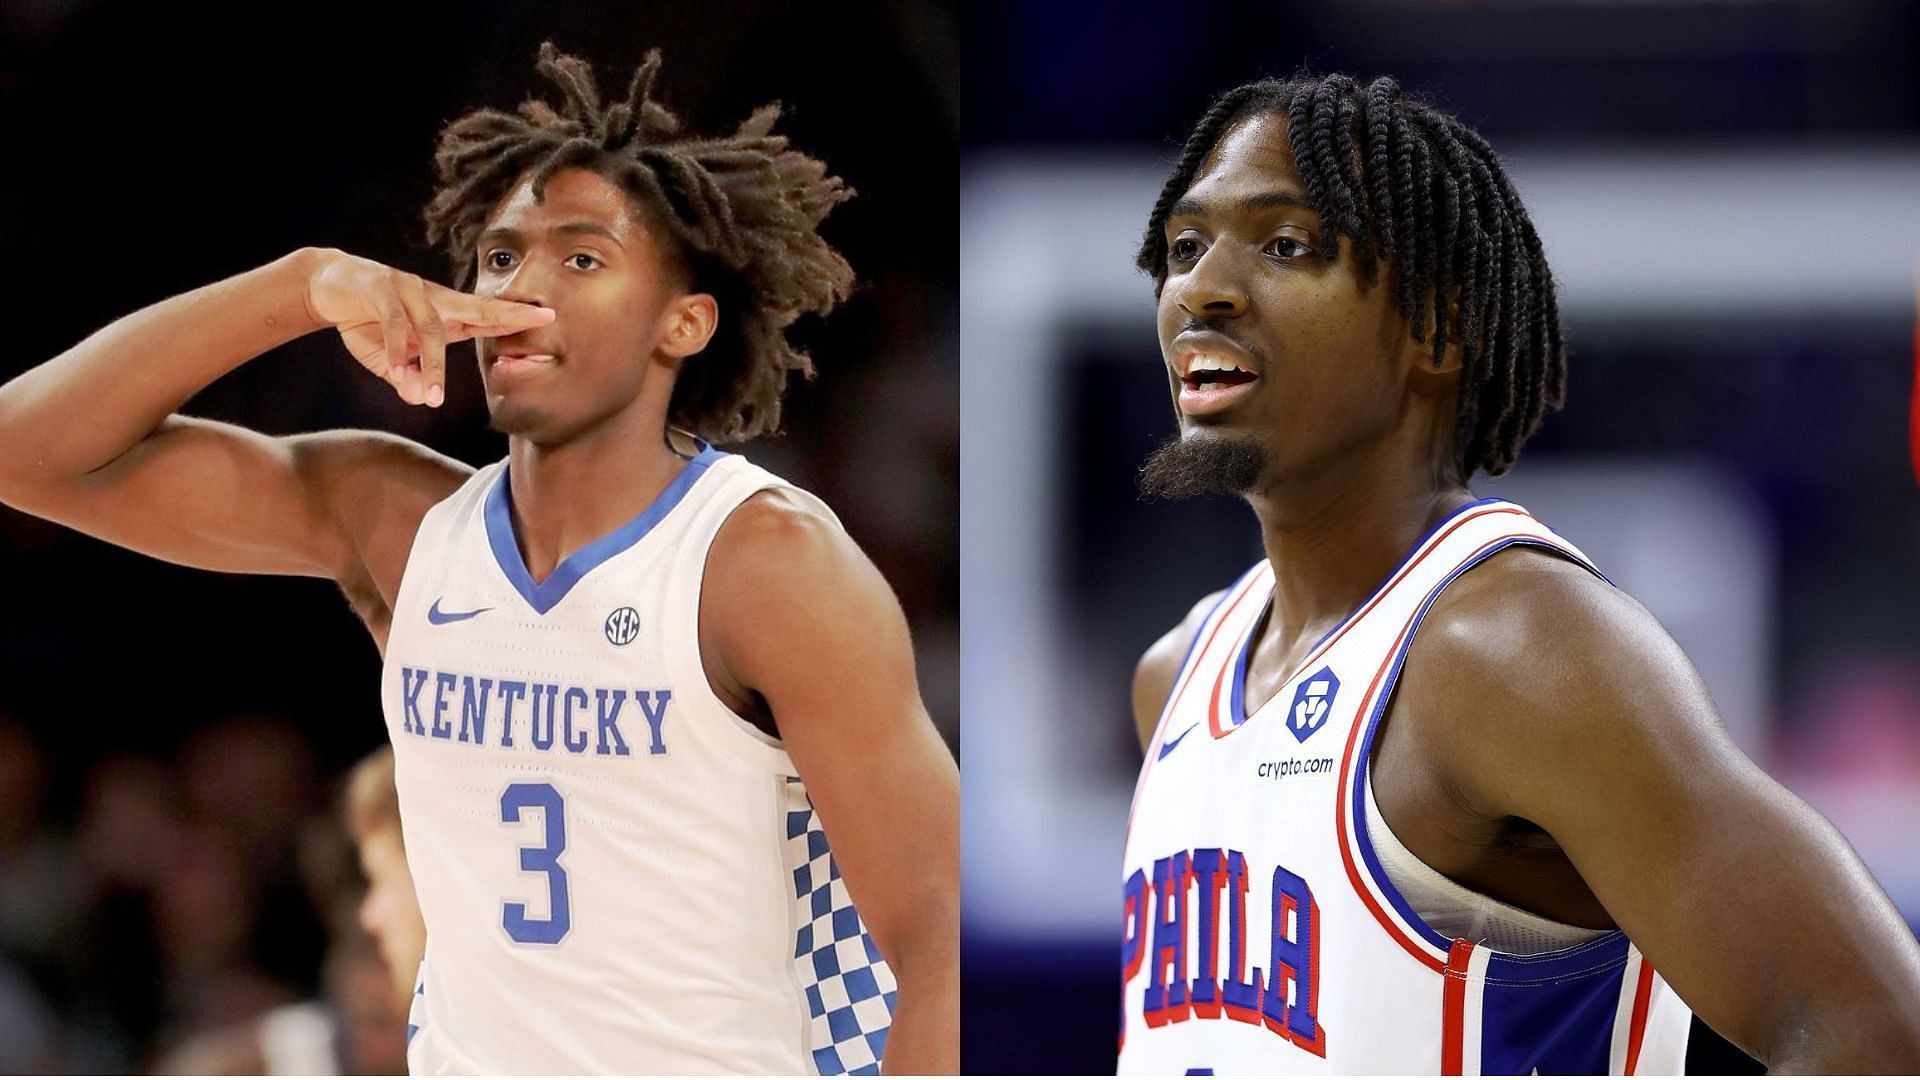 Philadelphia 76ers star Tyrese Maxey played college basketball for Kentucky